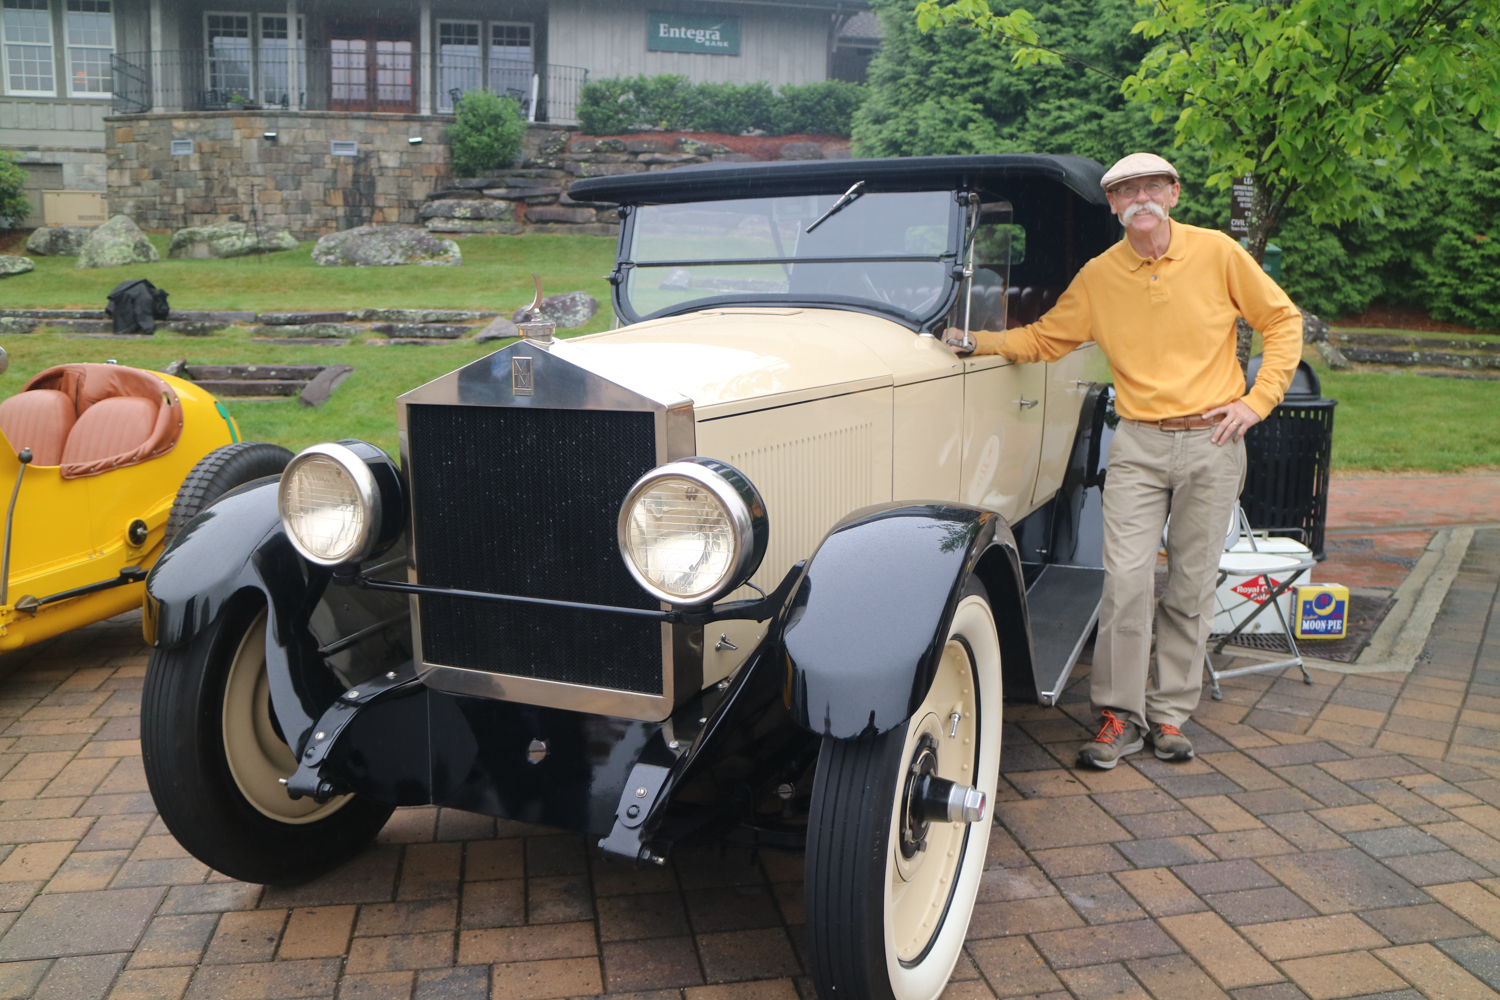 Dennis Gage beside a Moon automobile owned by a descendent of the man who built this car.